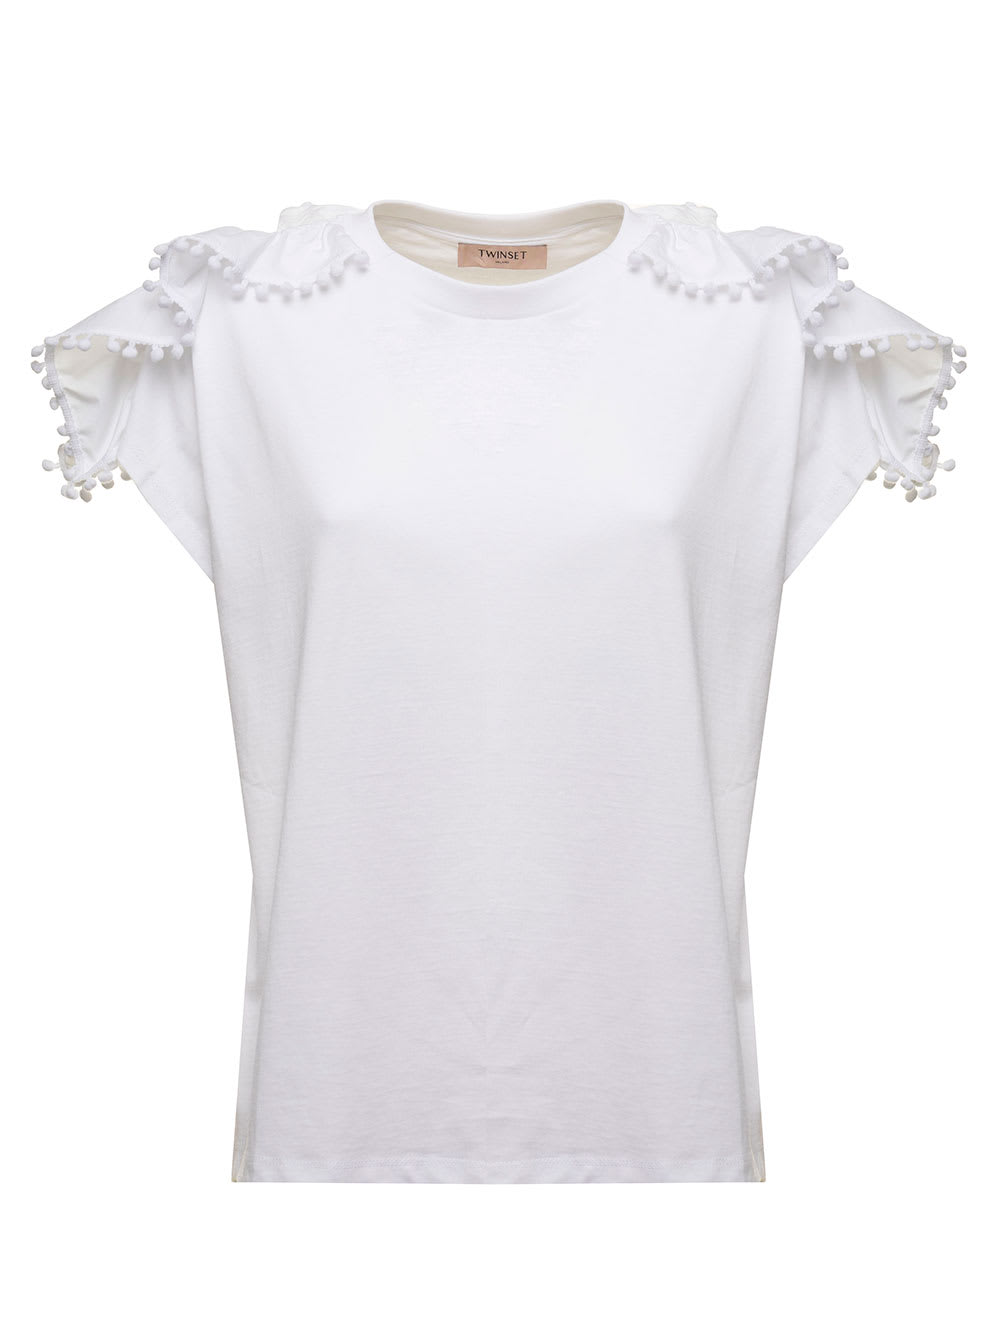 TwinSet Twin Set Womans White Cotton T-shirt With Cap Sleeves And Tassels